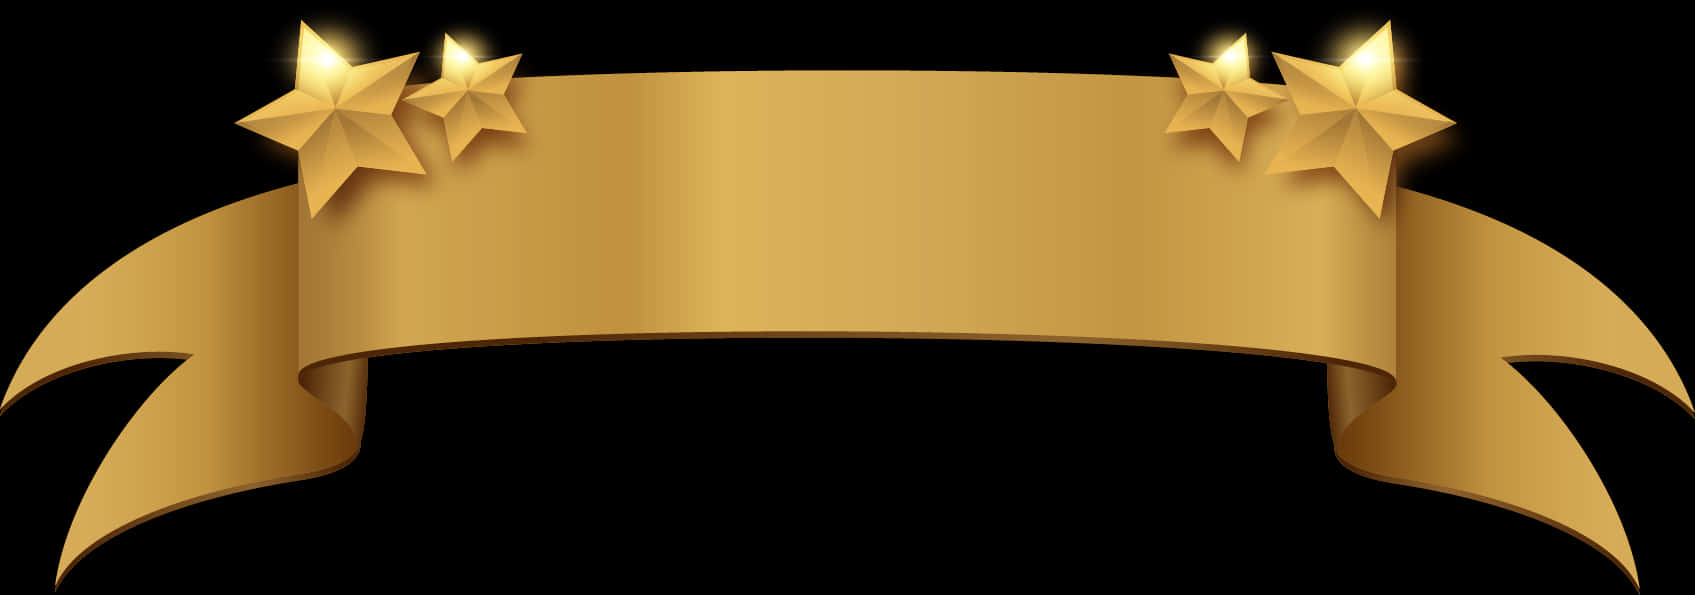 Golden Bannerwith Stars PNG image